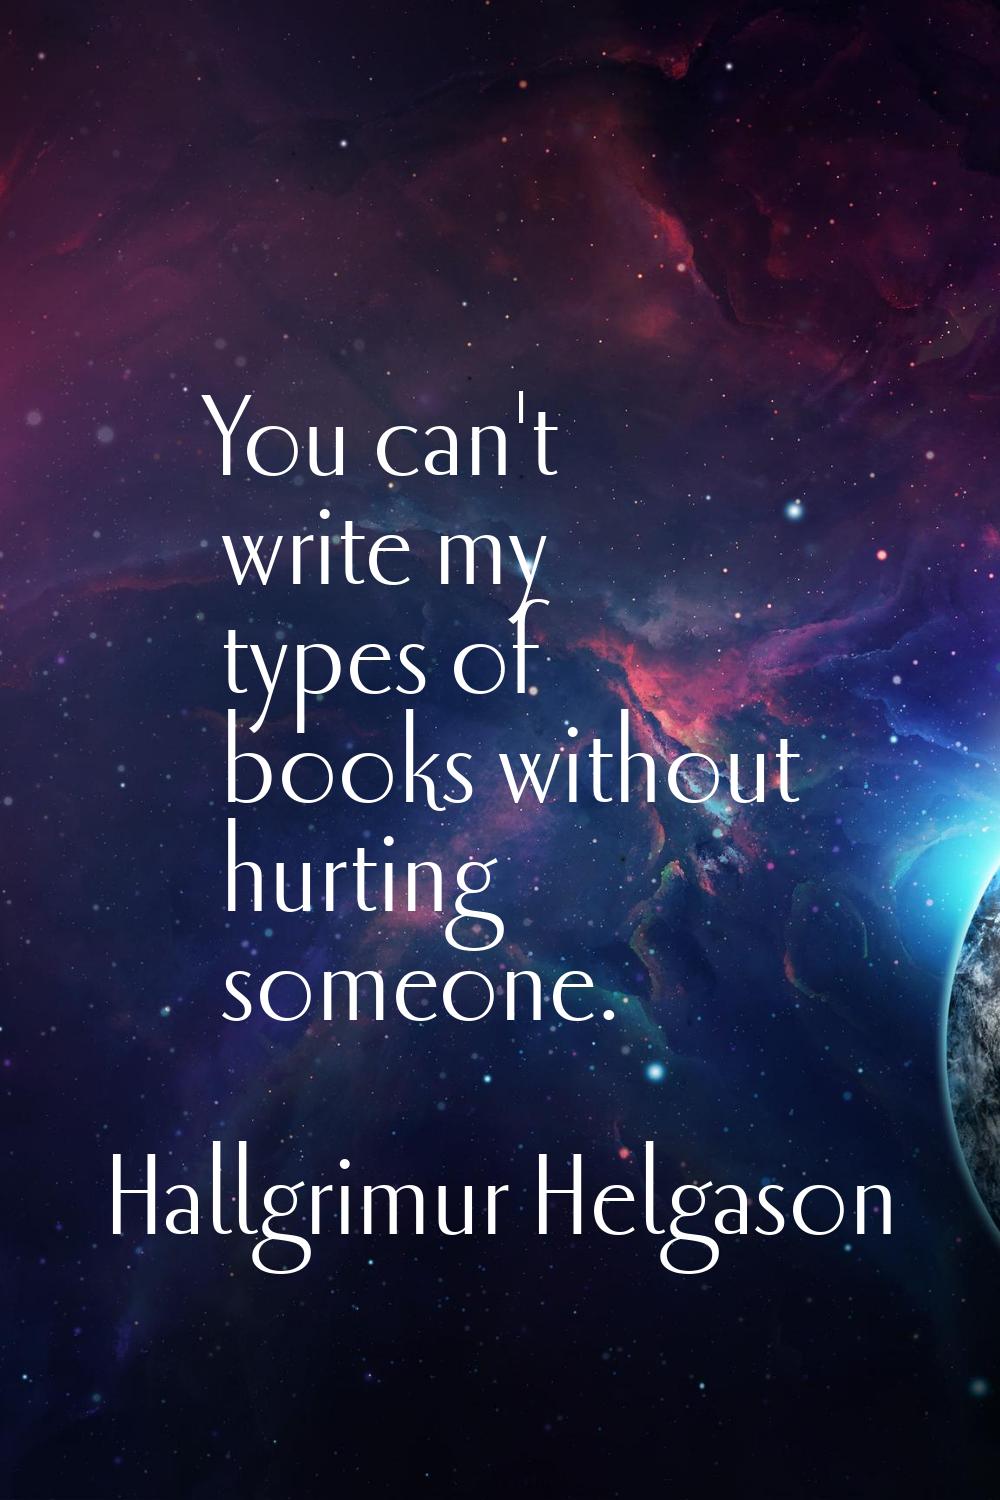 You can't write my types of books without hurting someone.